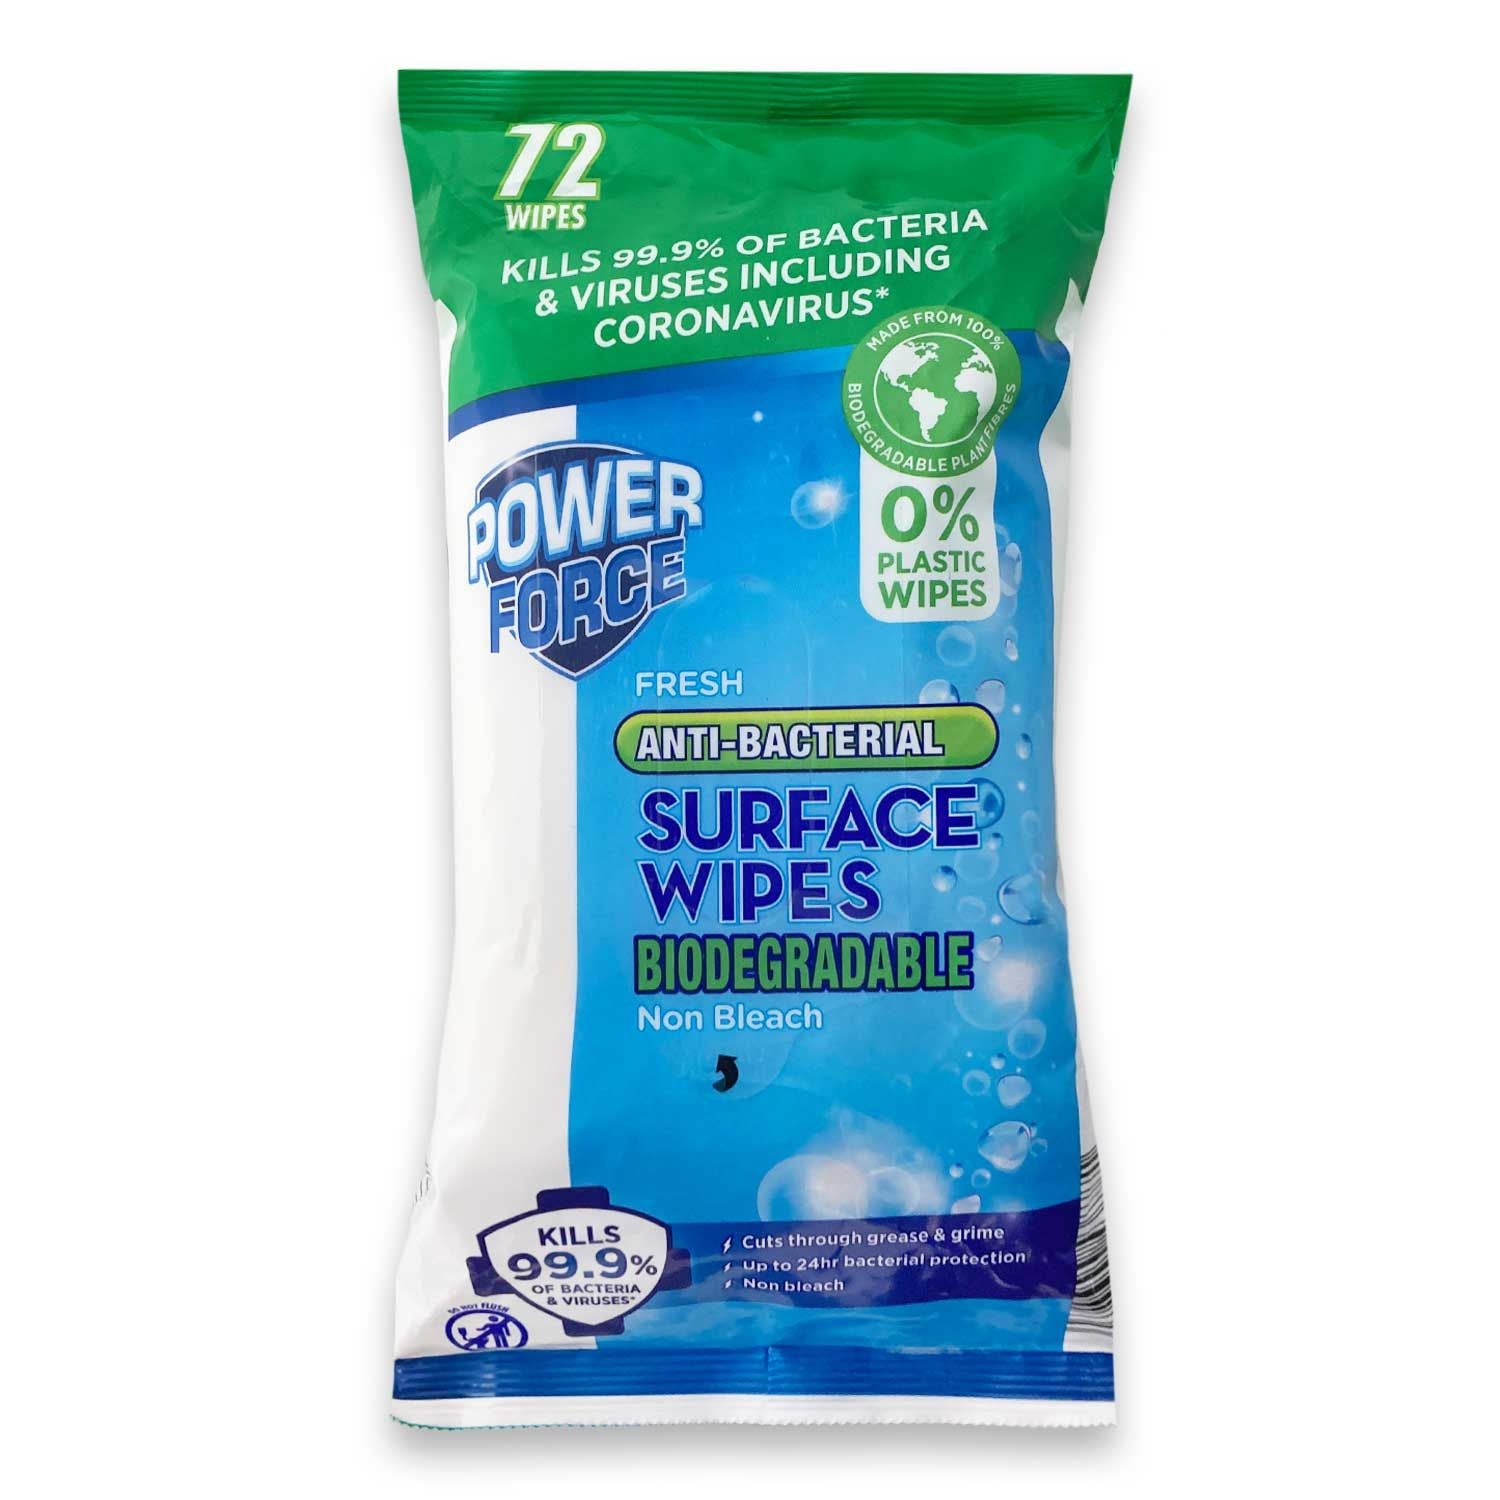 Powerforce Biodegradable Surface Wipes 72 Pack